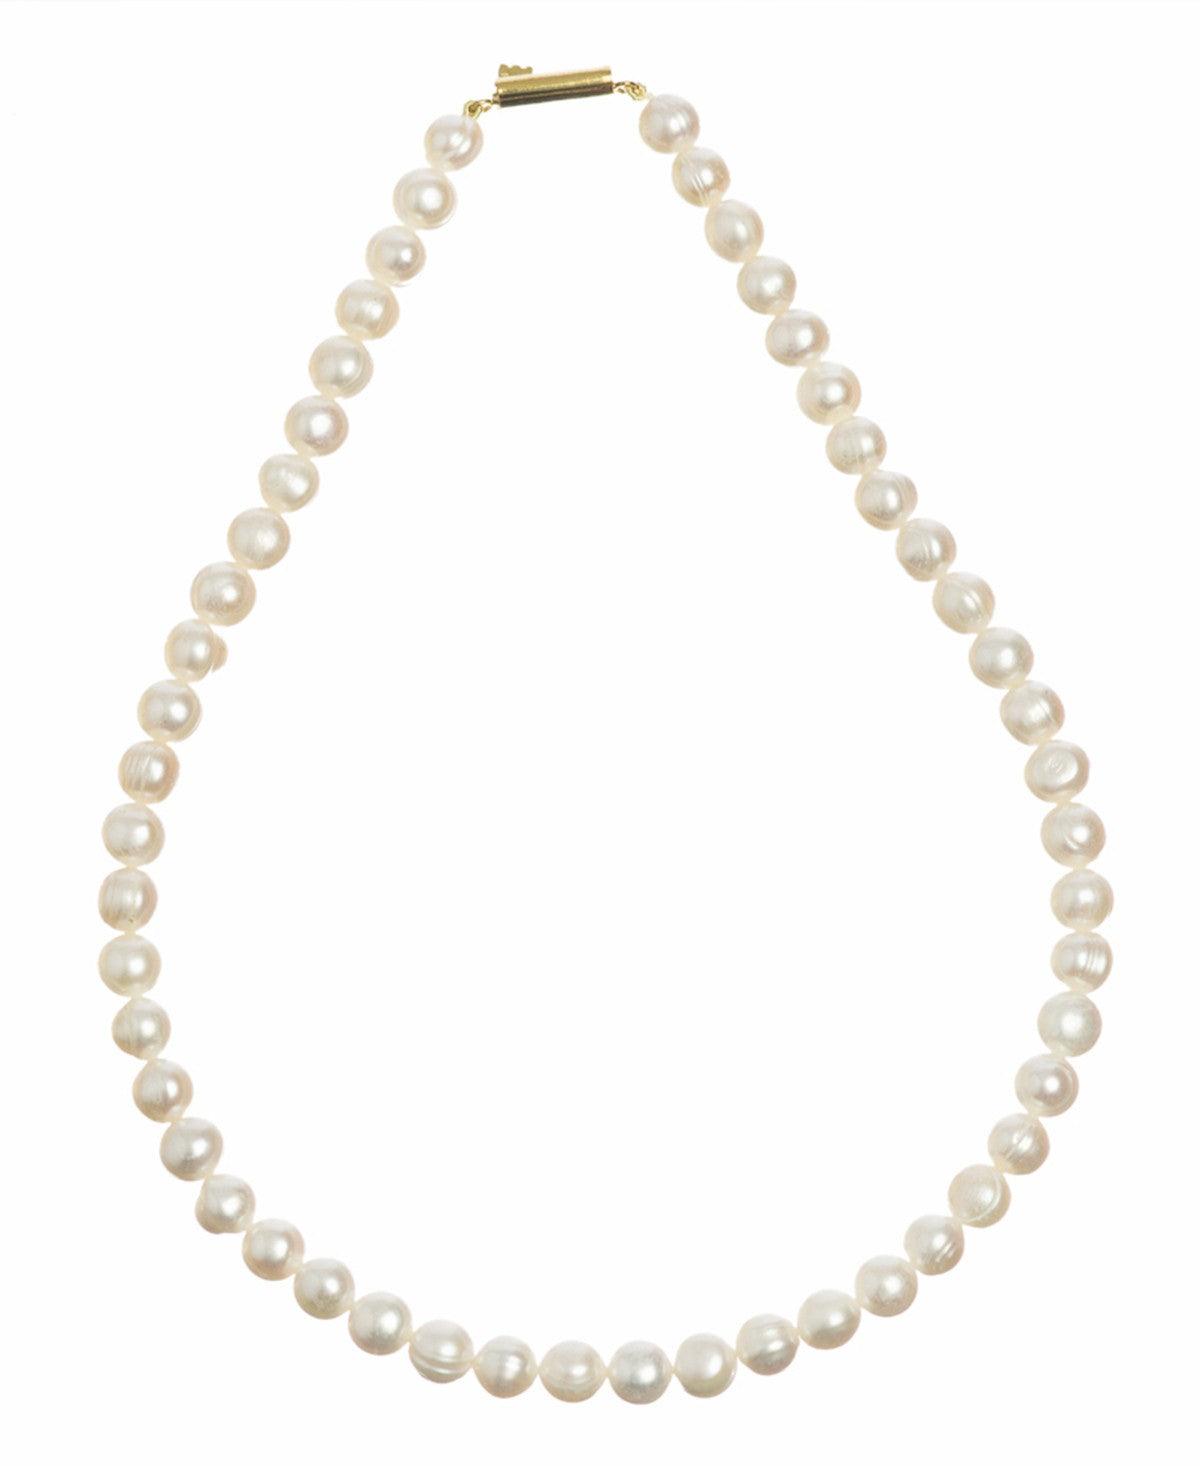 Gorgeous Pearl Necklace - Chandrani Pearls